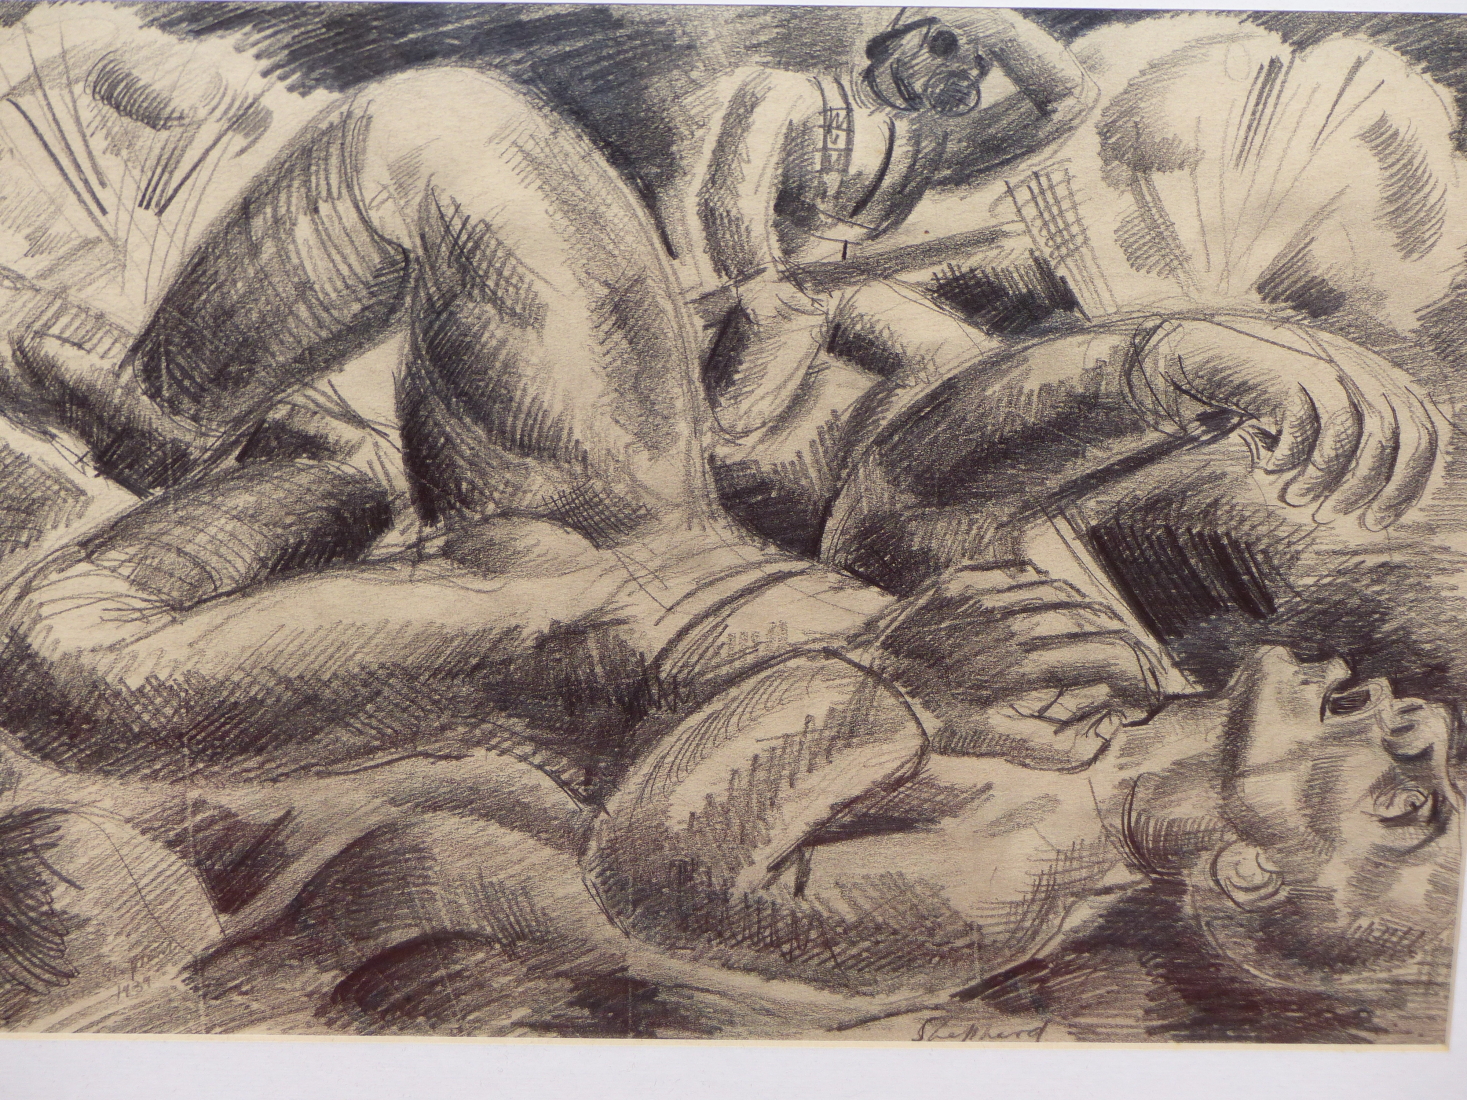 SIDNEY HORNE SHEPHERD (1909-93), A FALLEN WWII SOLDIER DURING A CHARGE, PENCIL, SIGNED TWICE AND